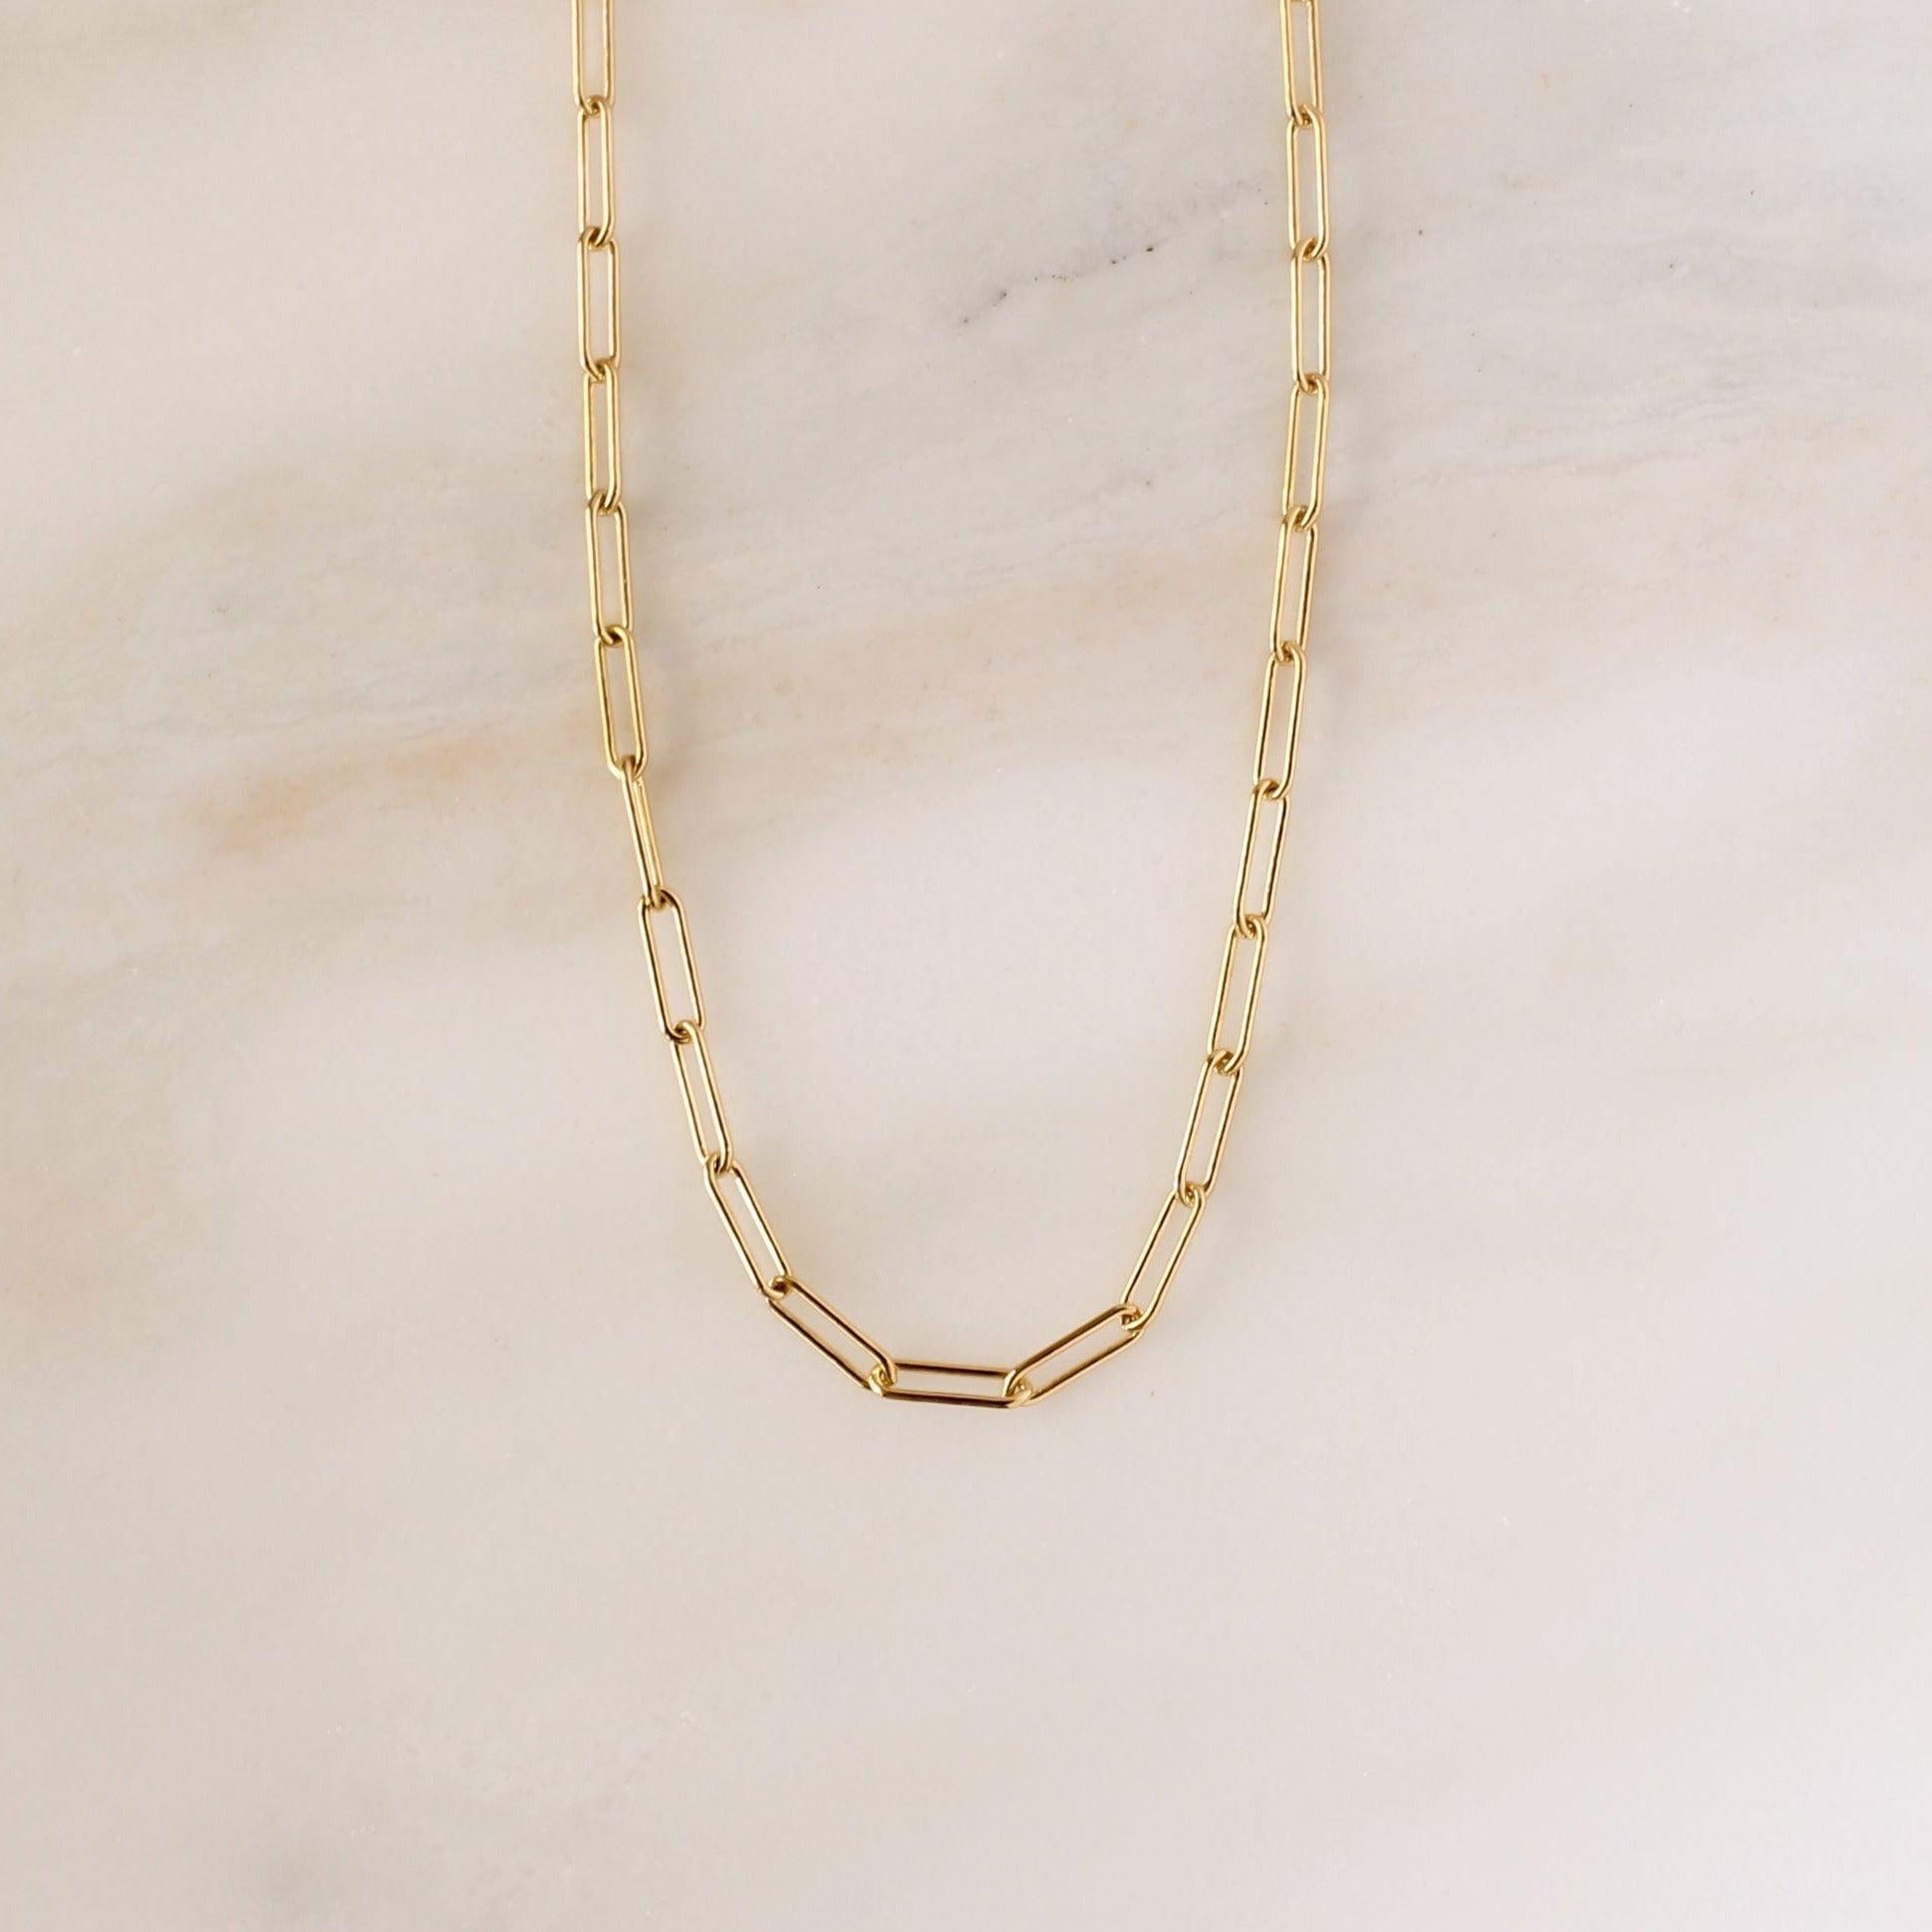 Bold Paperclip Chain Necklace - Nolia Jewelry - Meaningful + Sustainably Handcrafted Jewelry